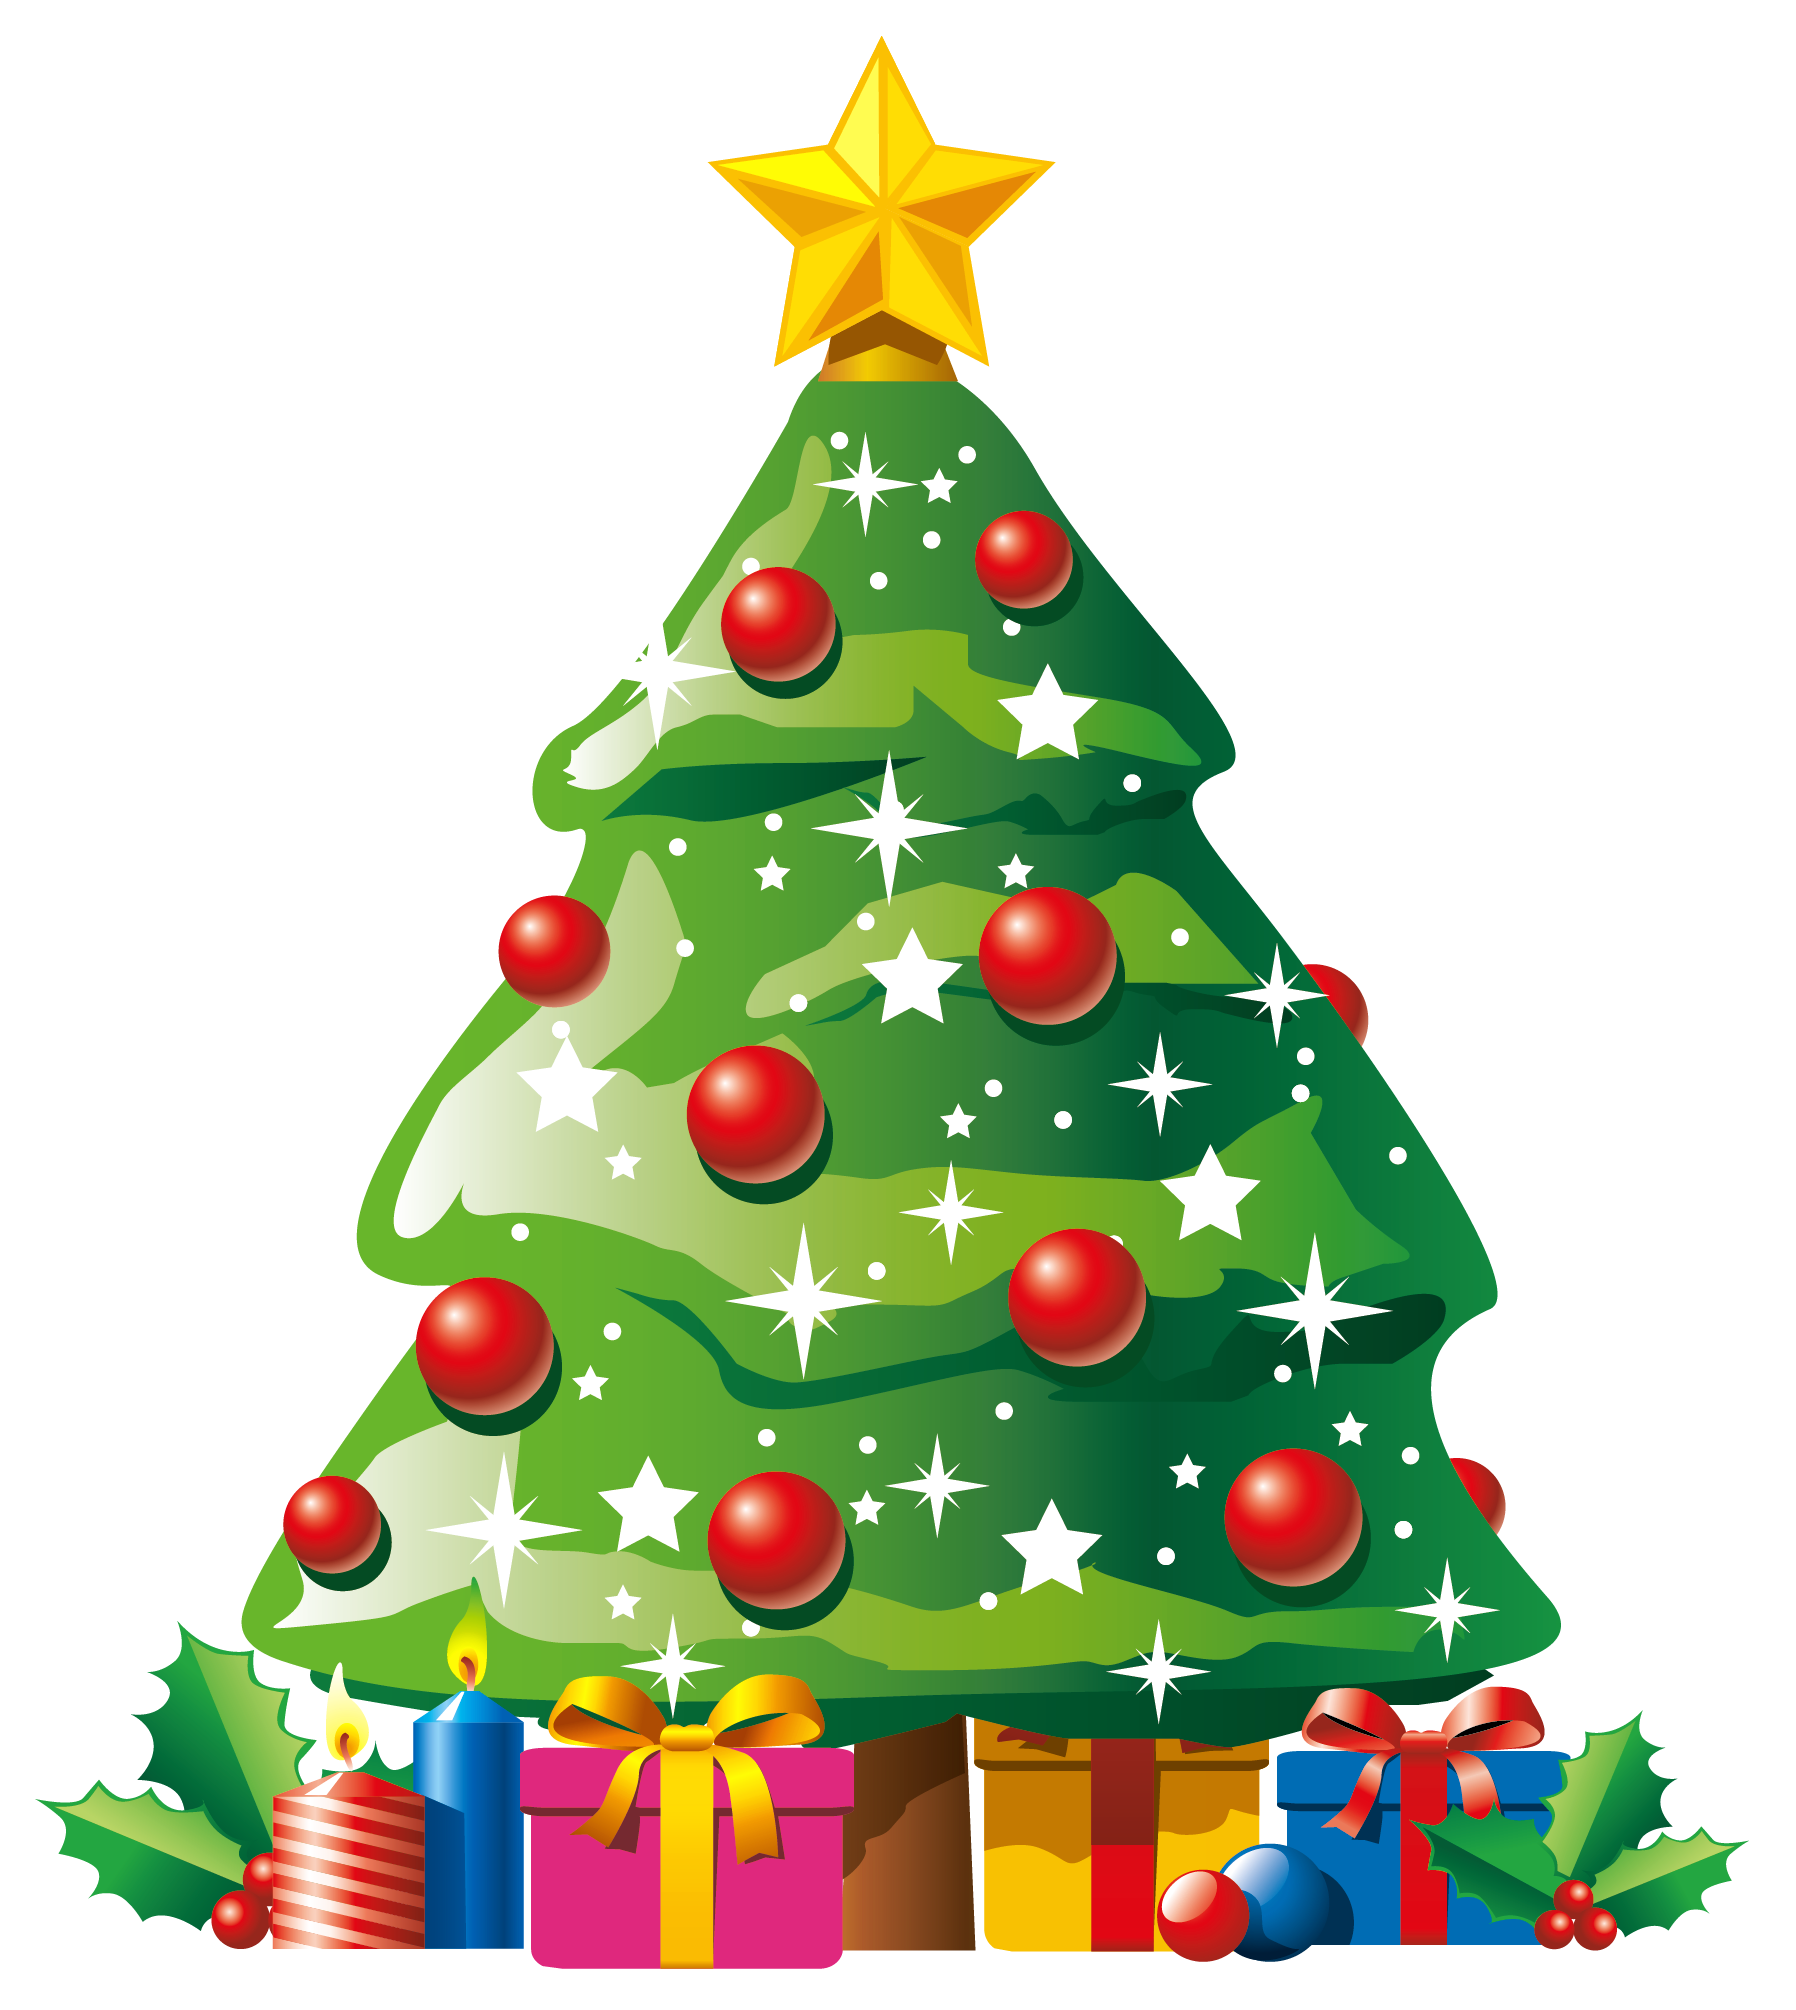 Christmas Tree With Presents Clip Art – Happy Holidays!